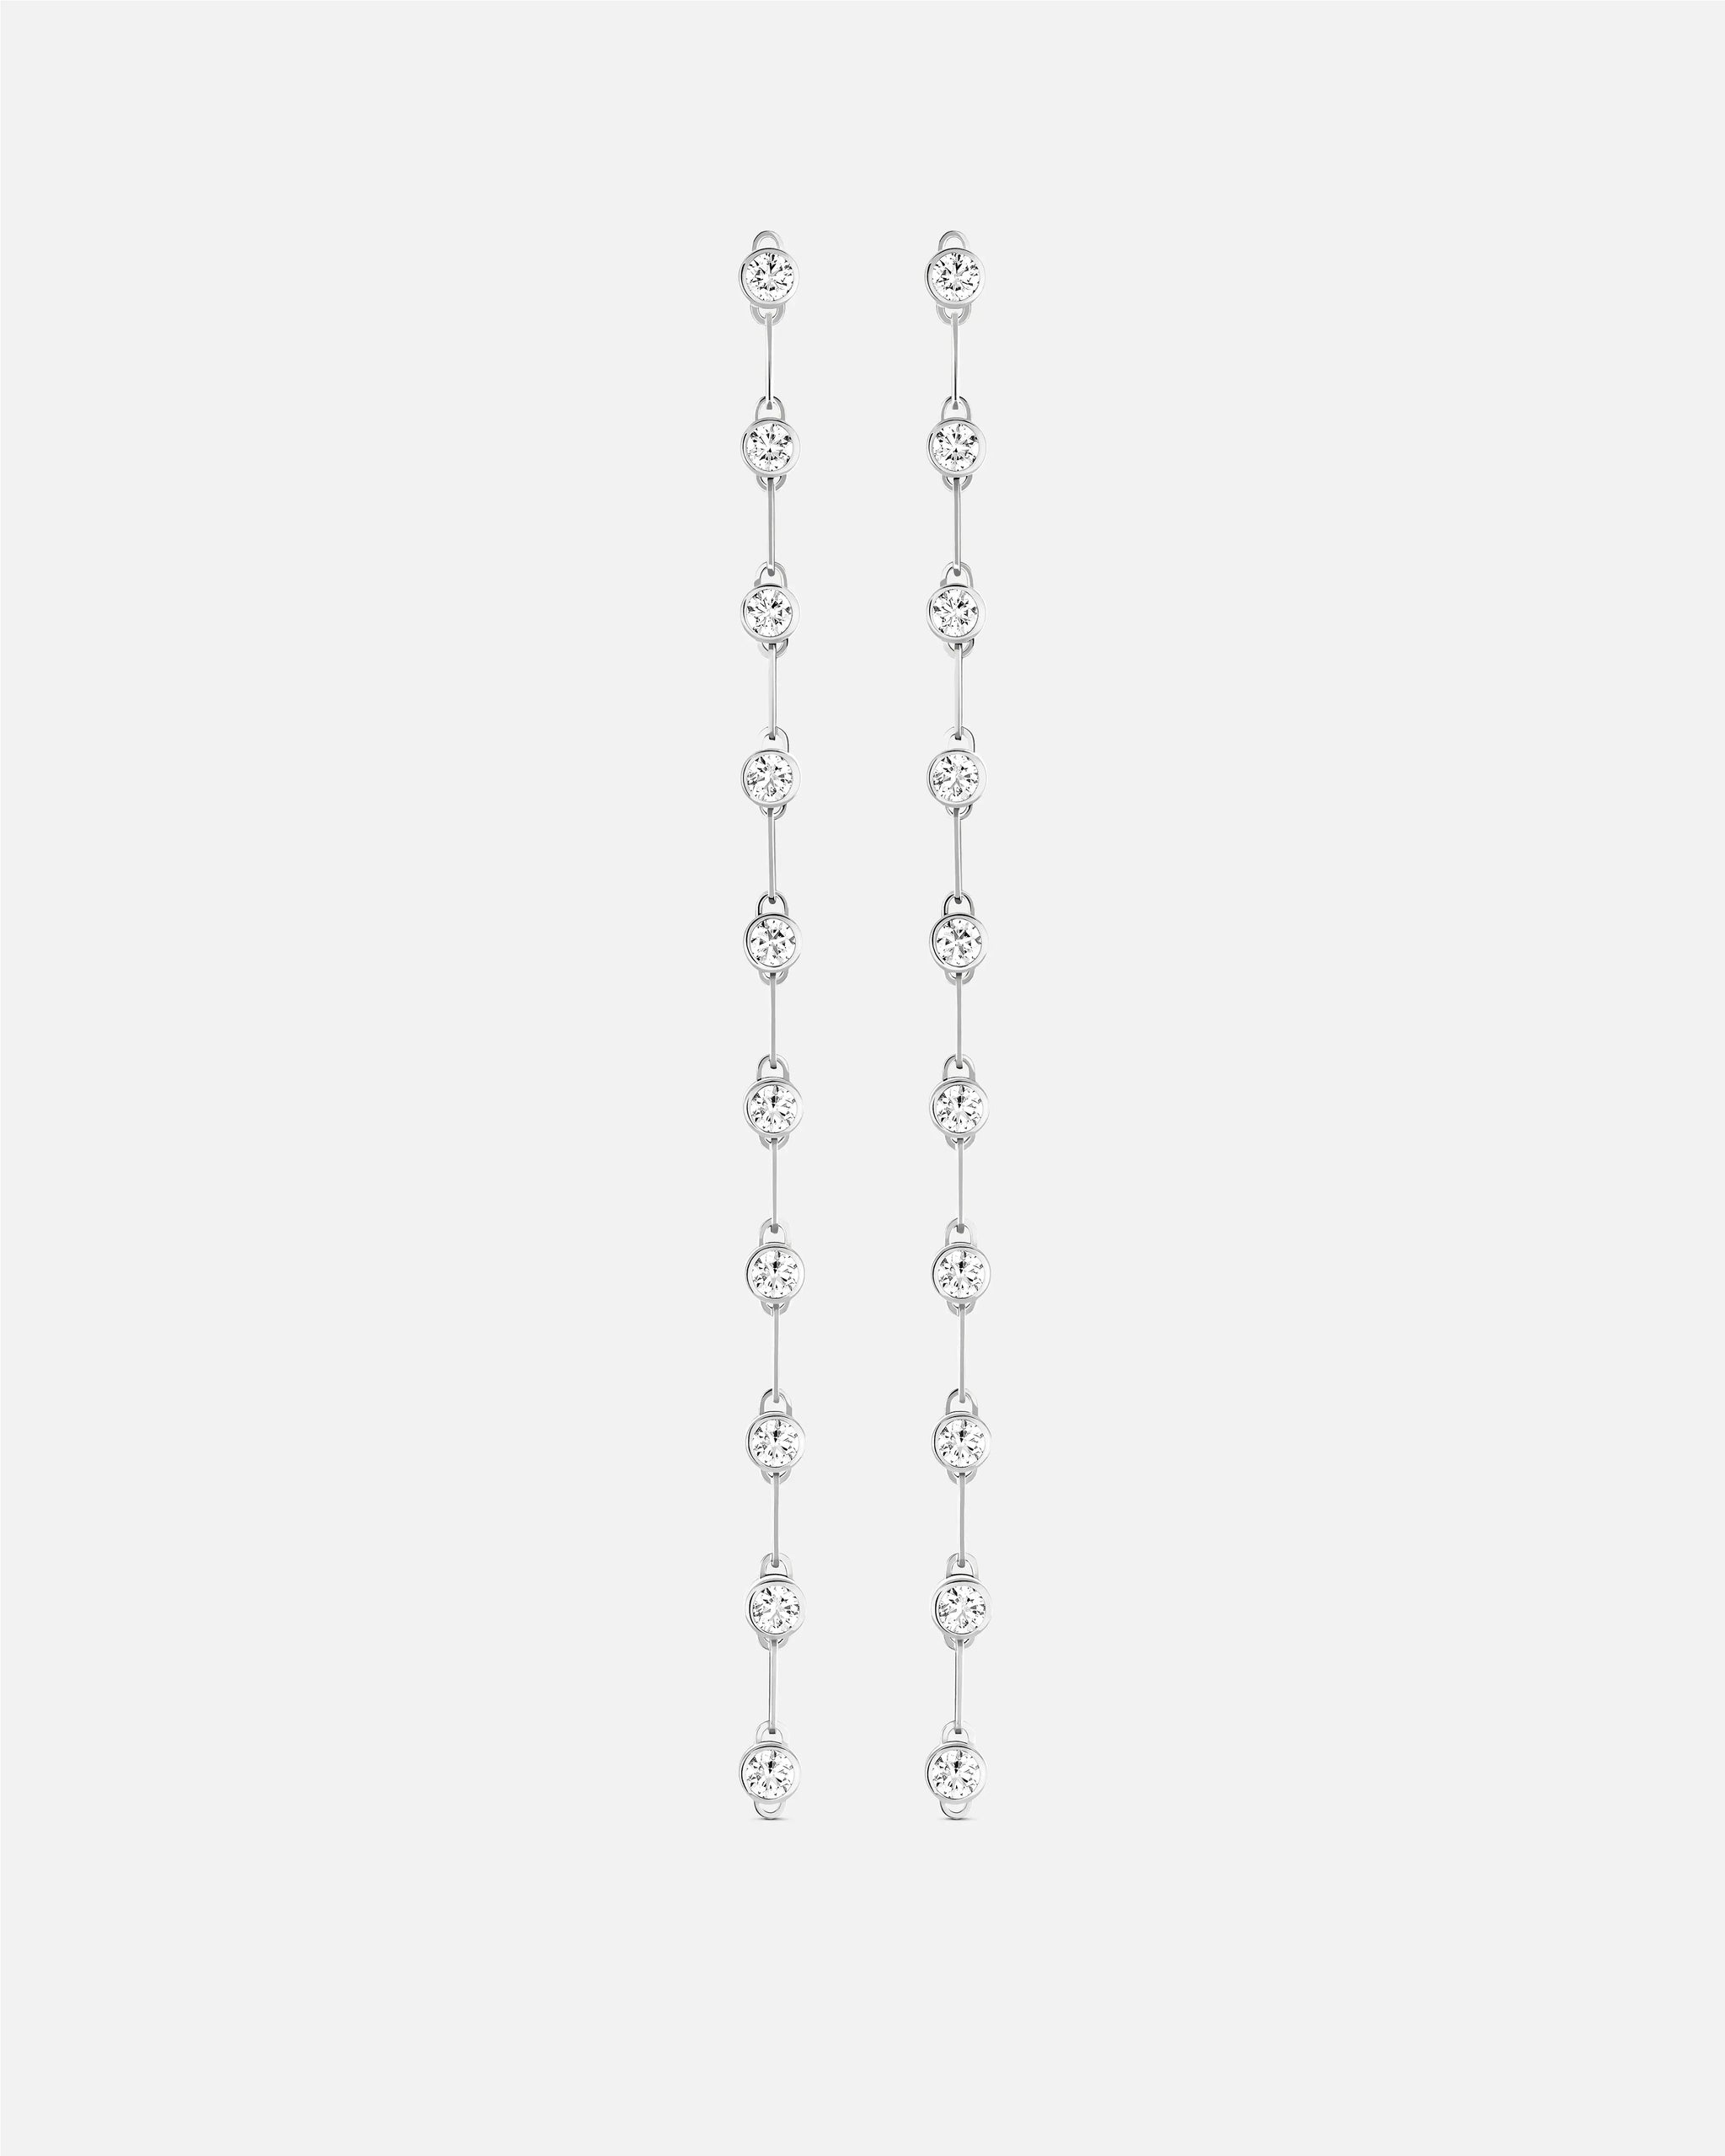 Gala GM Classics Earrings in White Gold - 1 - Nouvel Heritage